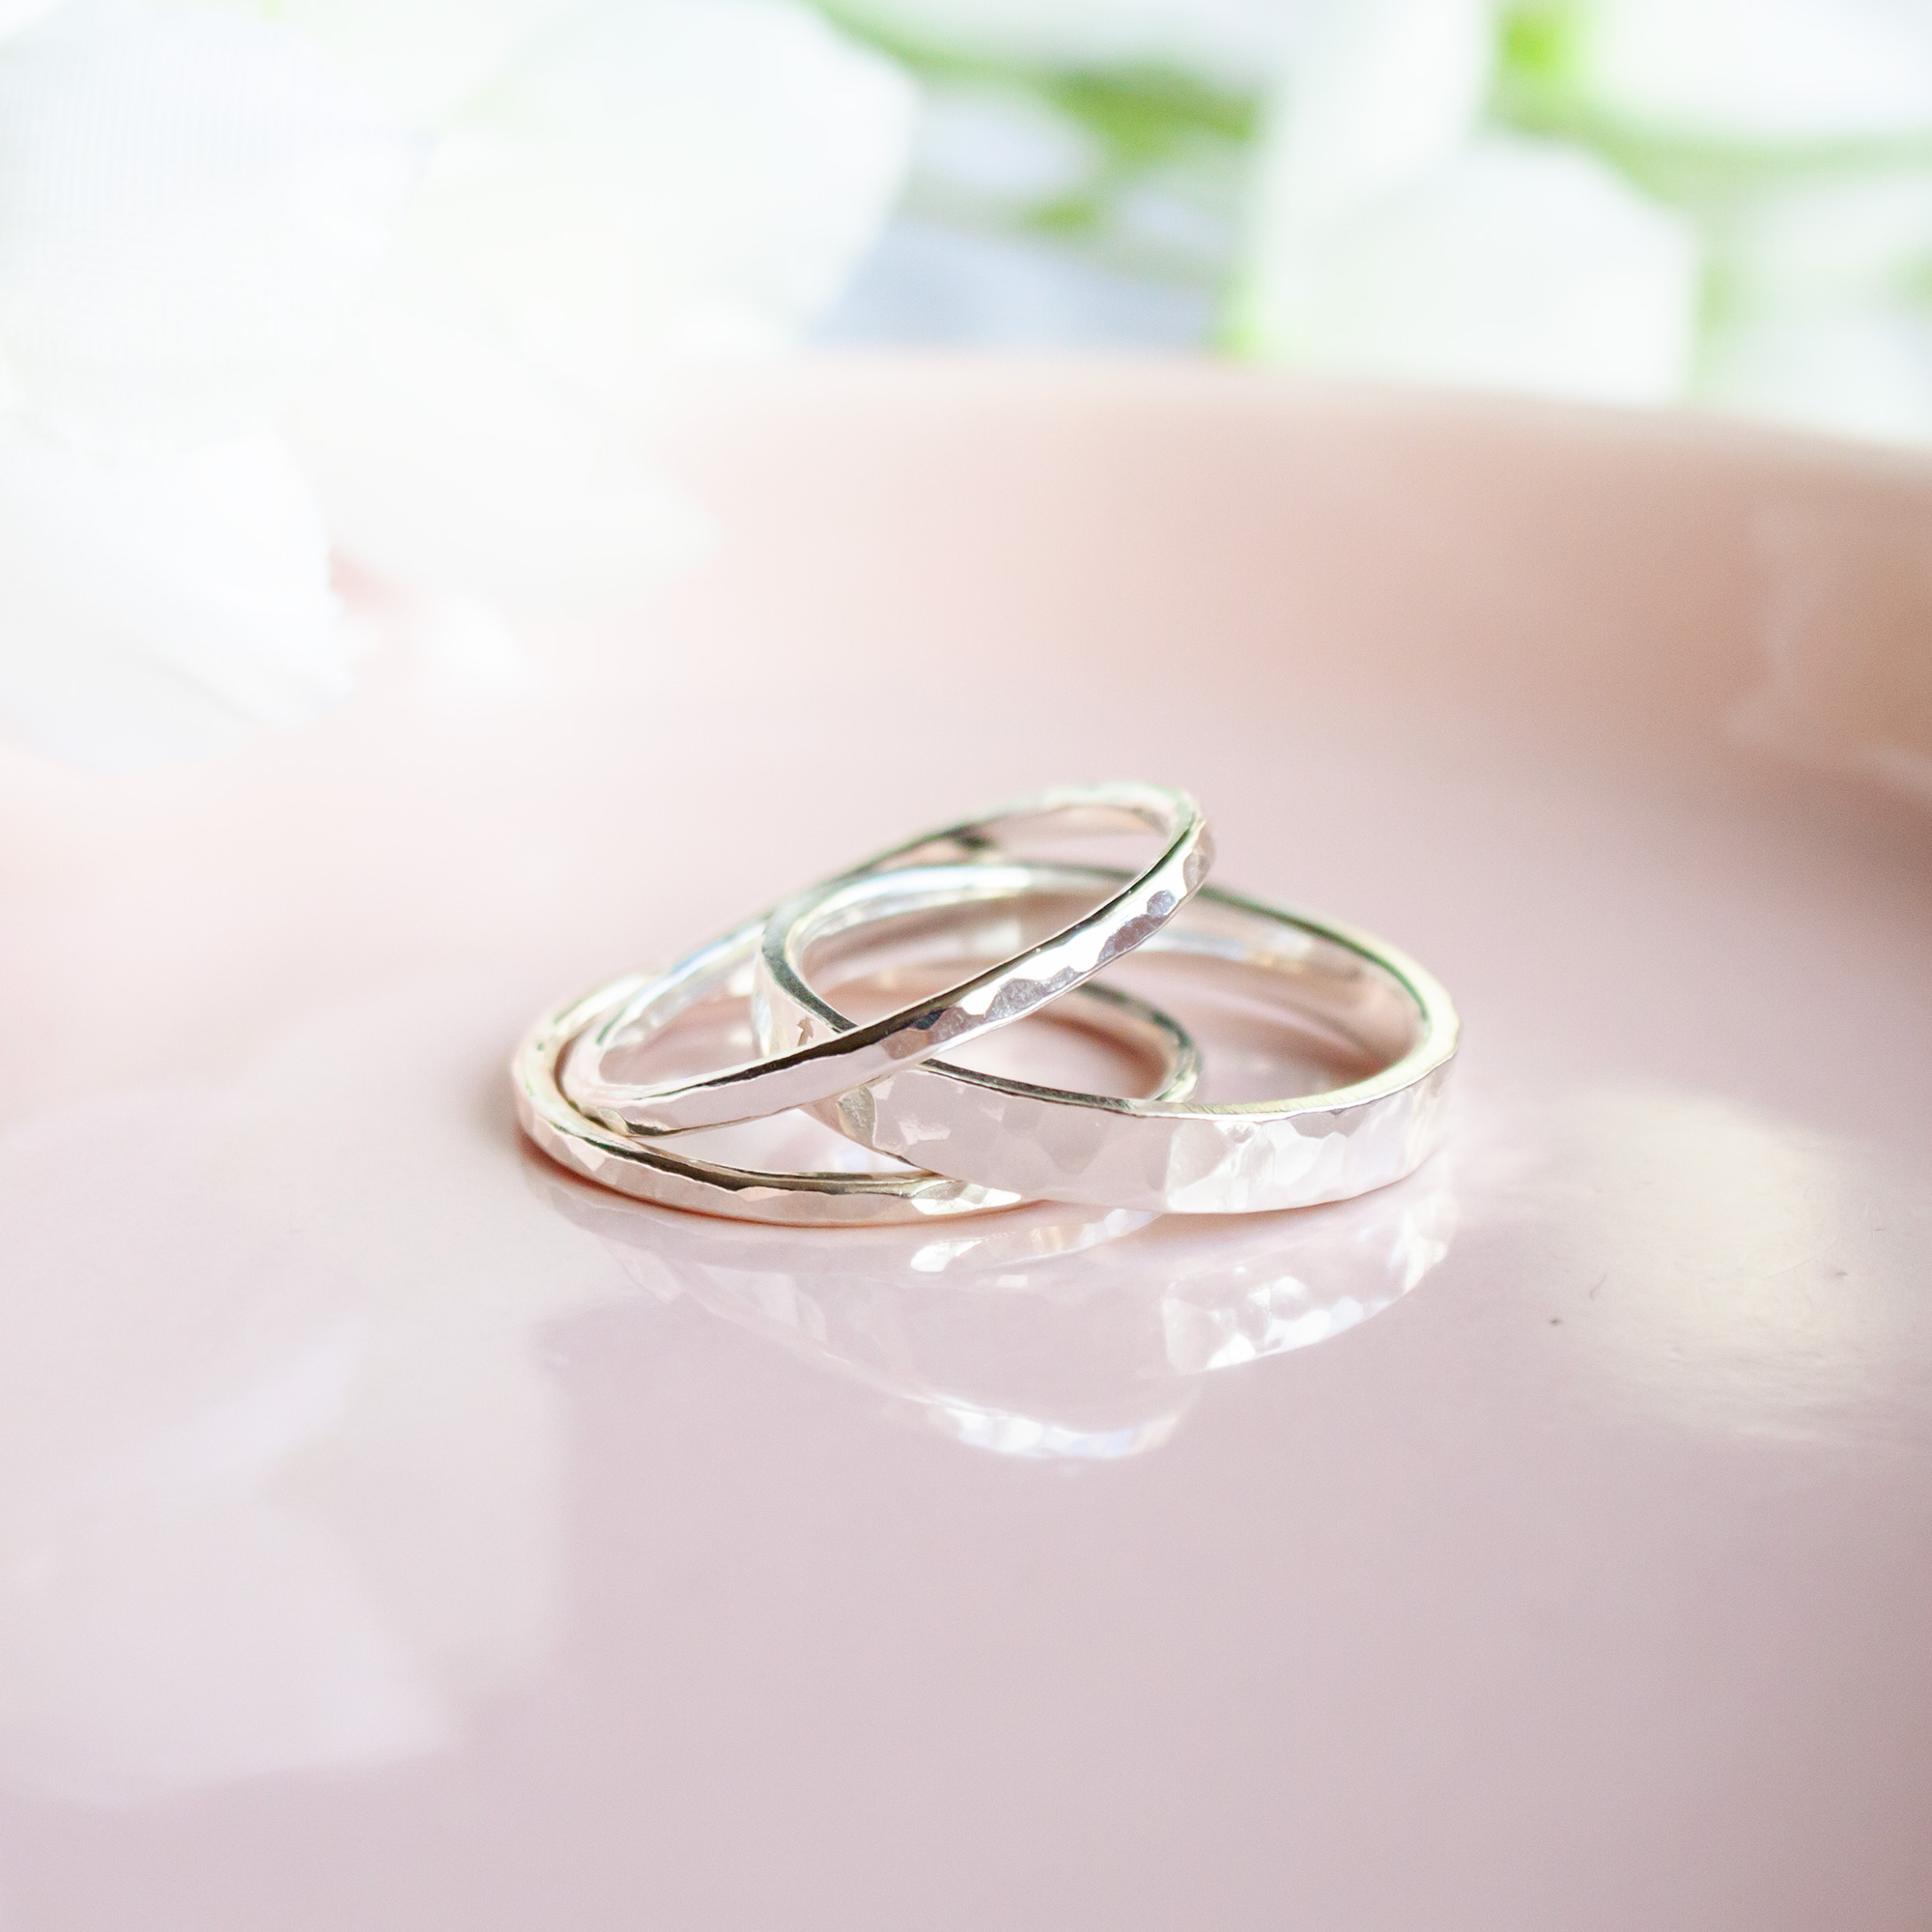 Mallow hammered stacking rings